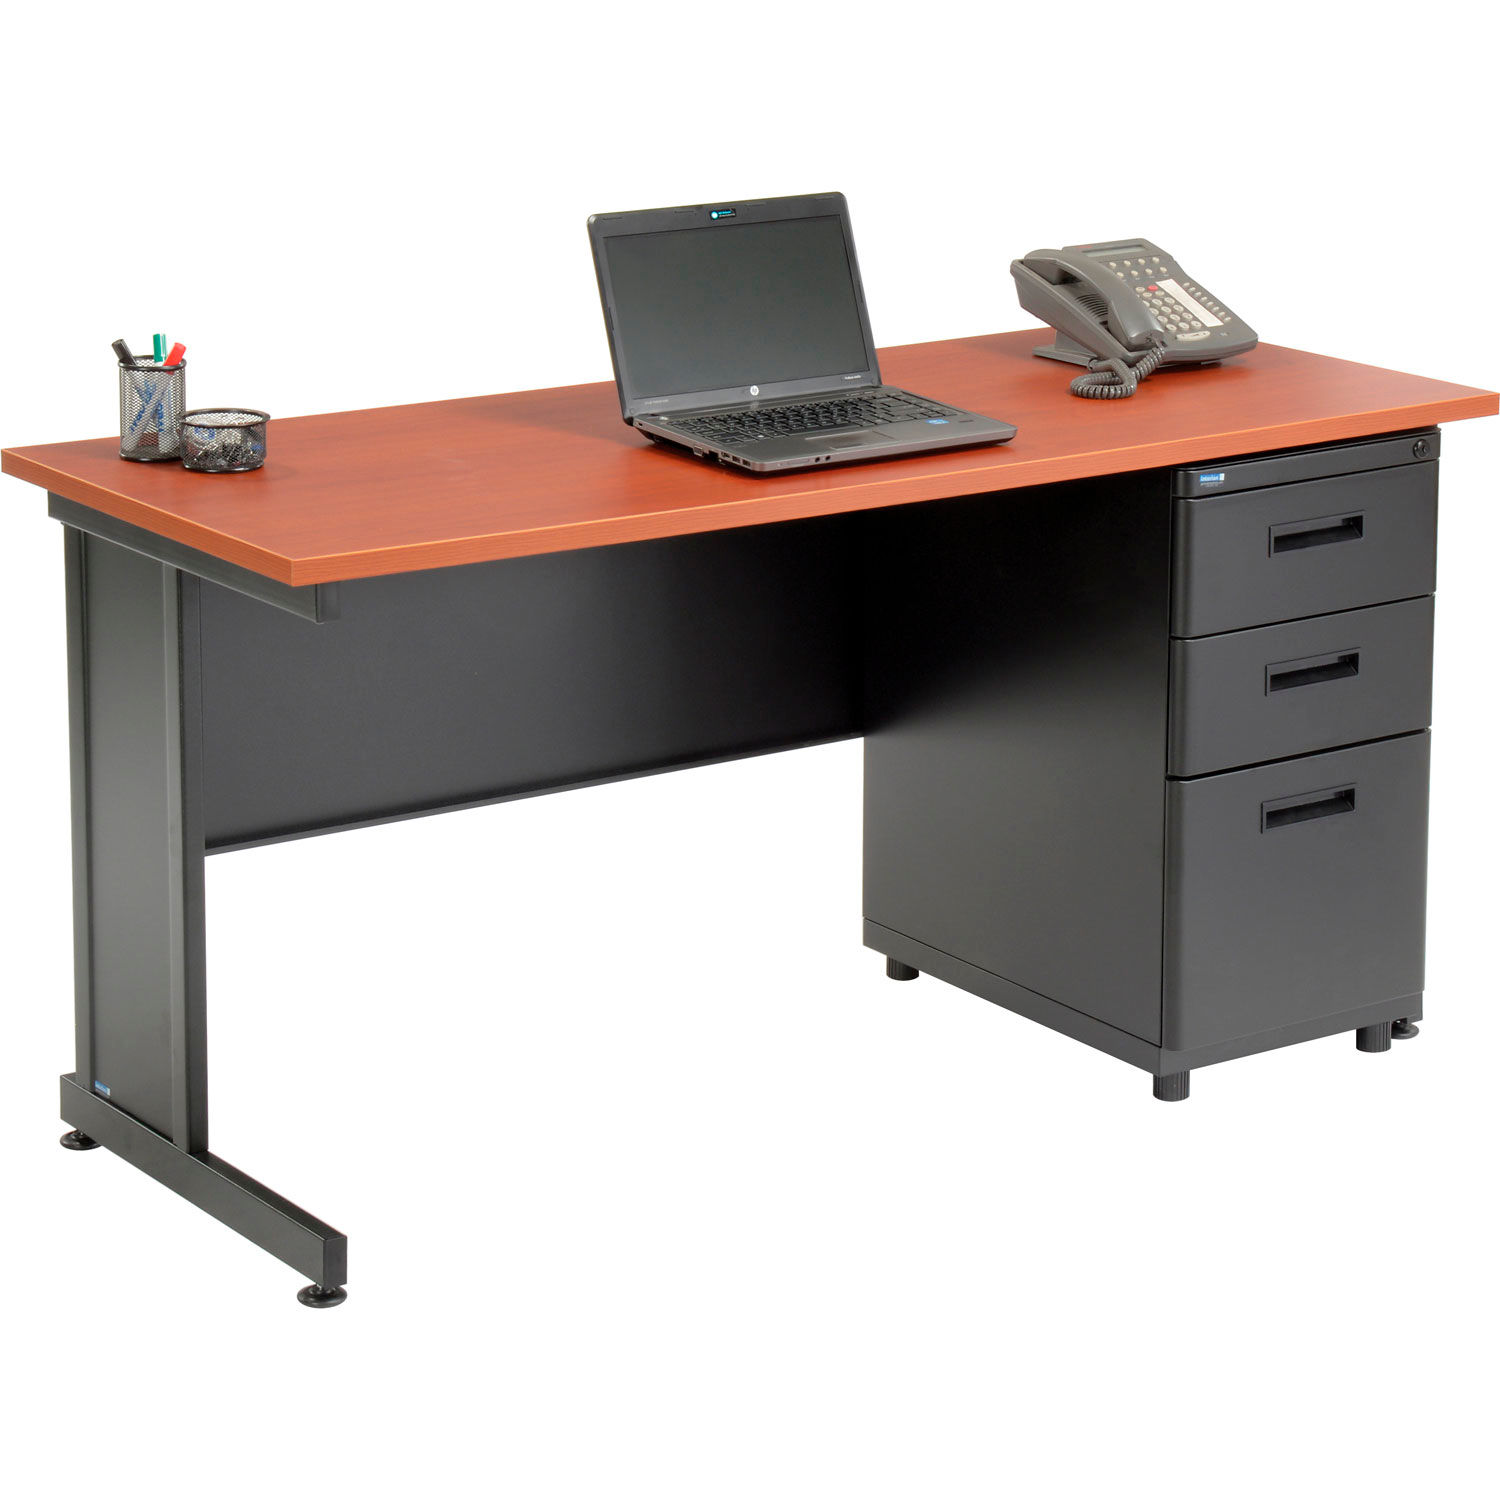 Desks Steel Office Collections Interion 174 Office Desk With